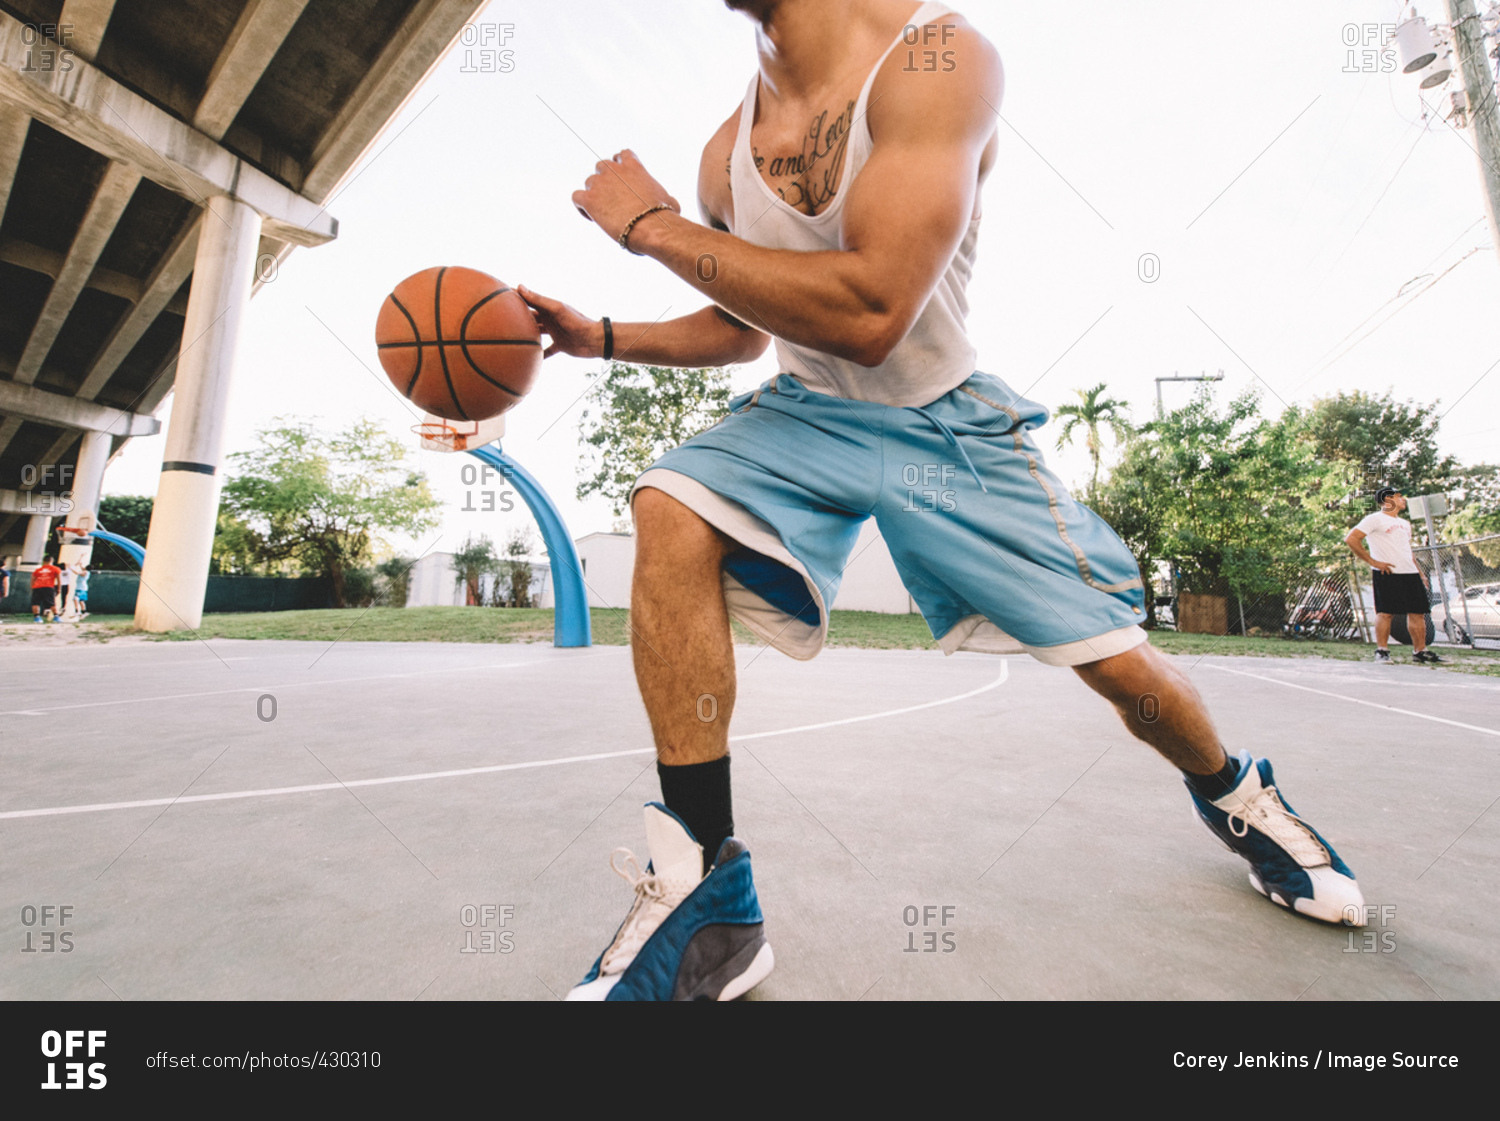 Cropped view of man on basketball court running, bouncing basketball